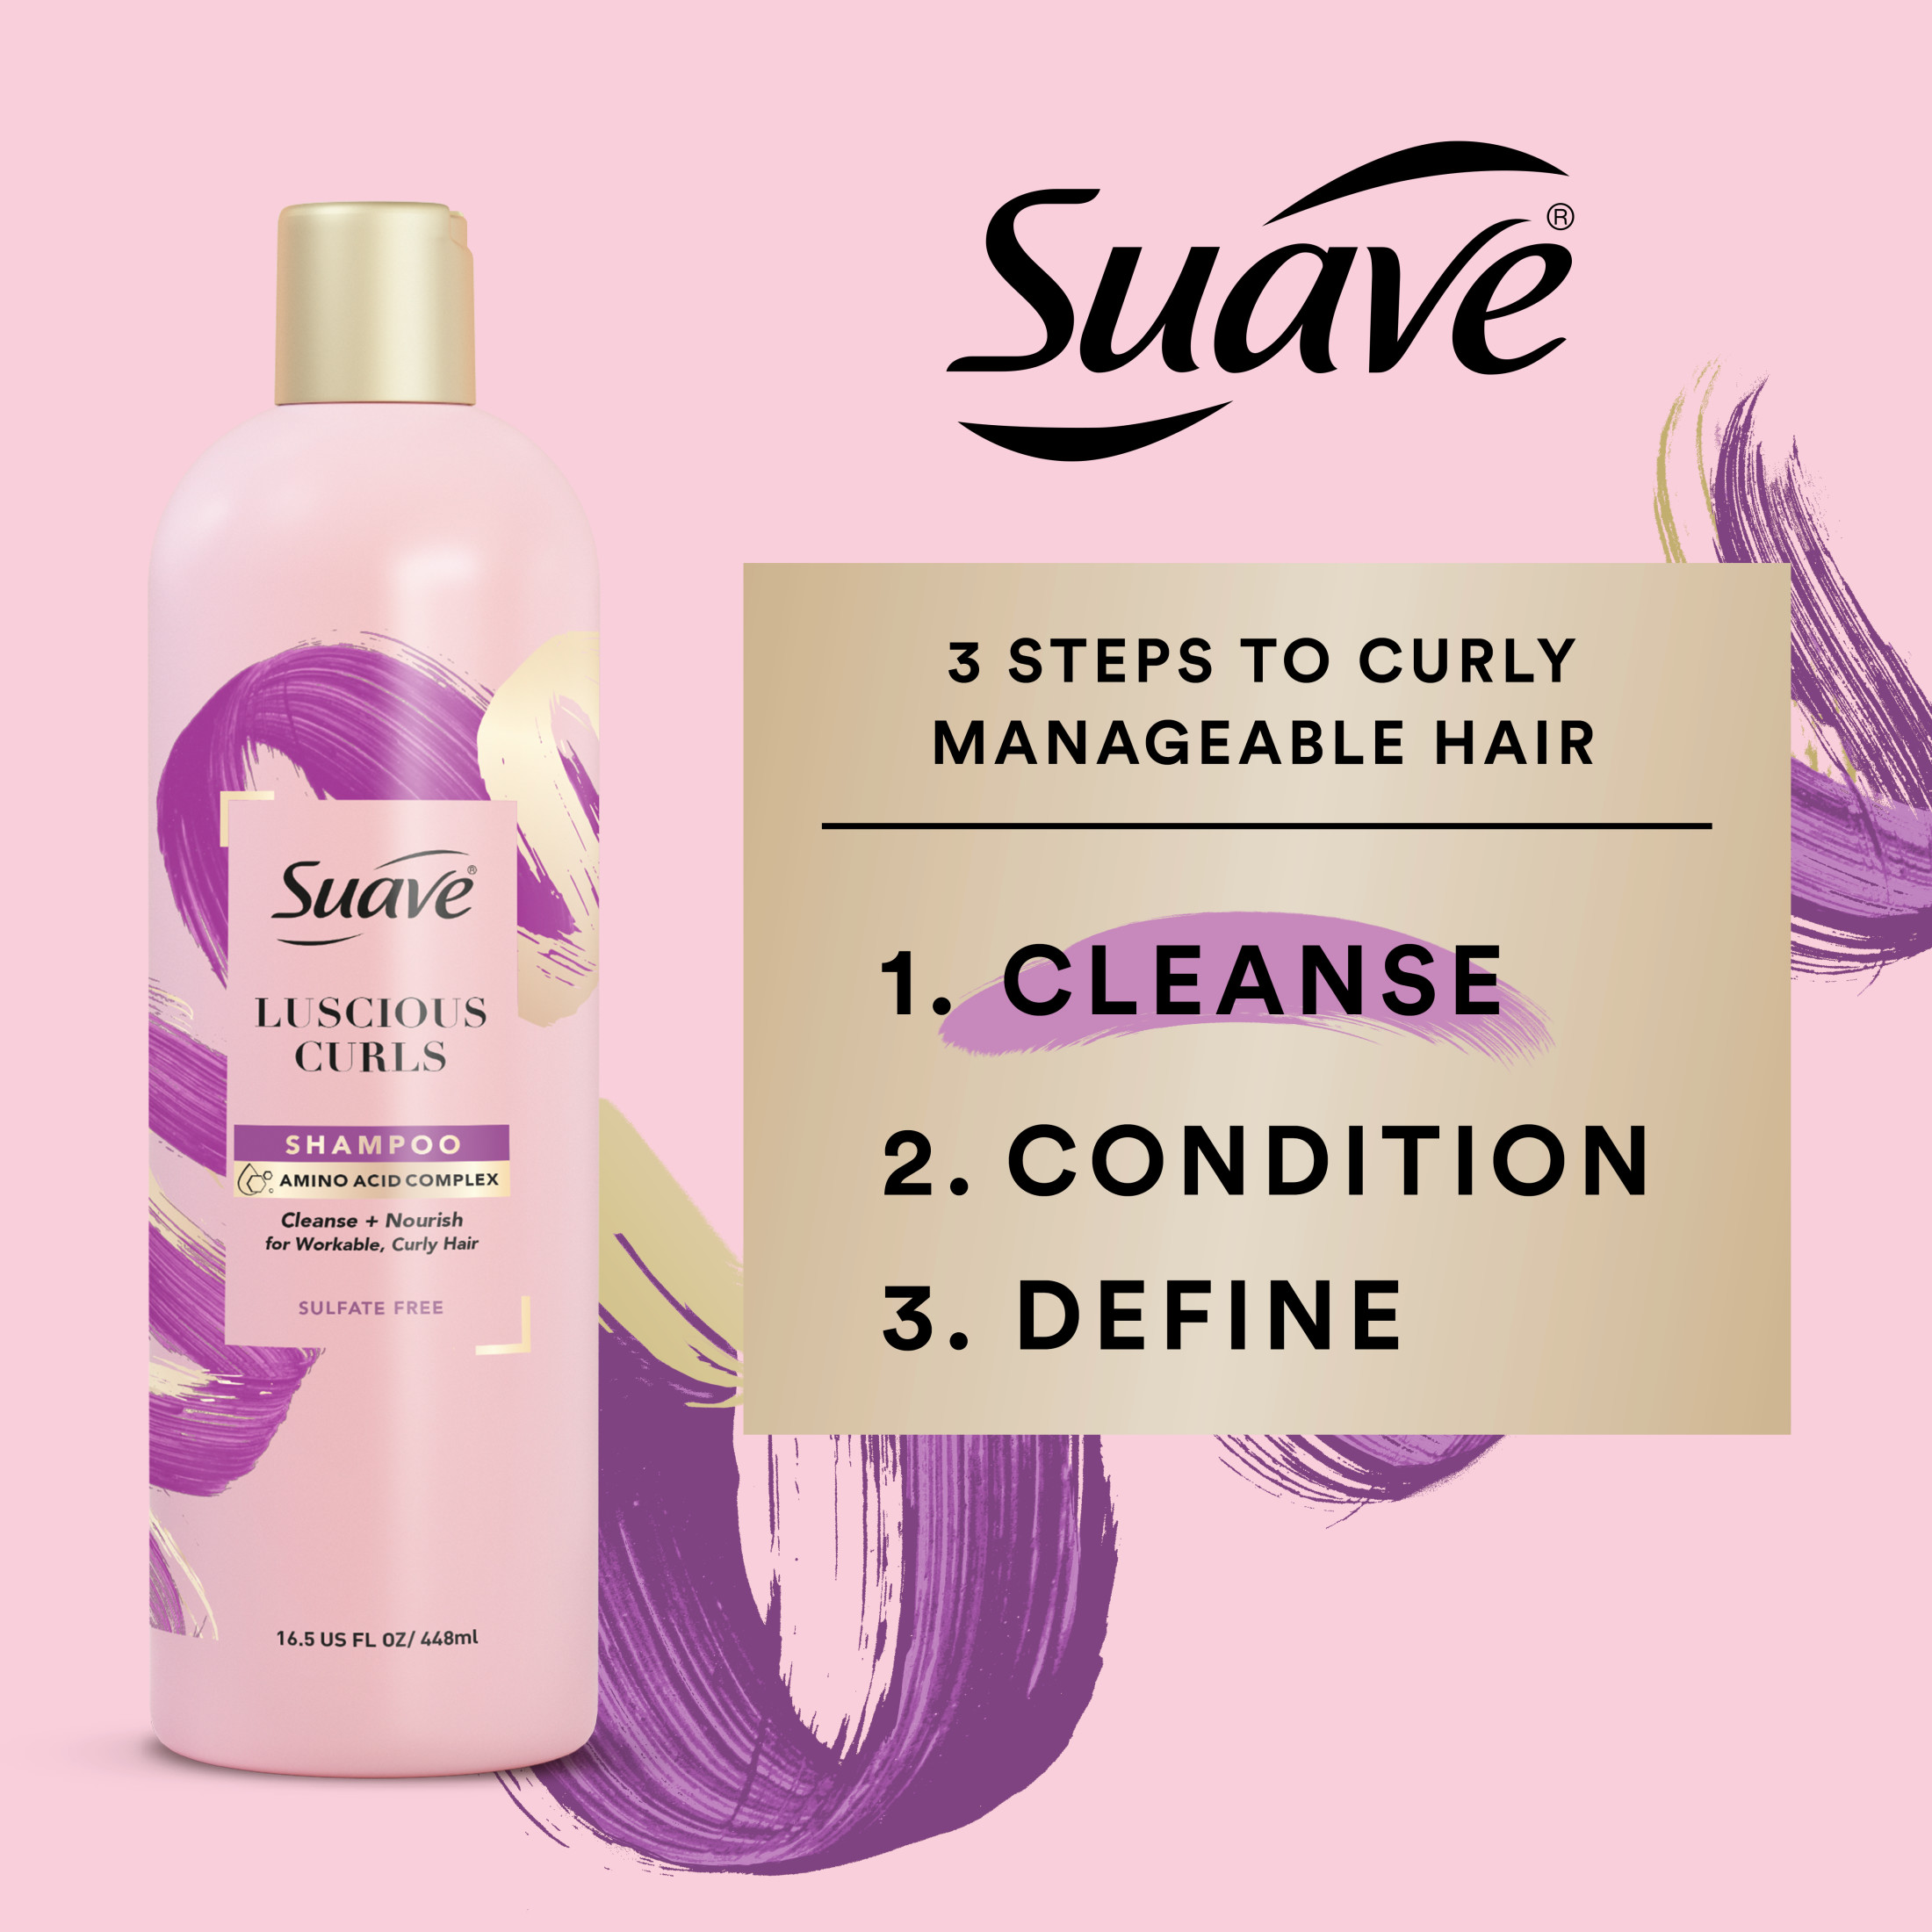 Suave Pink Luscious Curls Curl Defining Shampoo with Amino Acid Complex, 16.5 oz - image 5 of 12